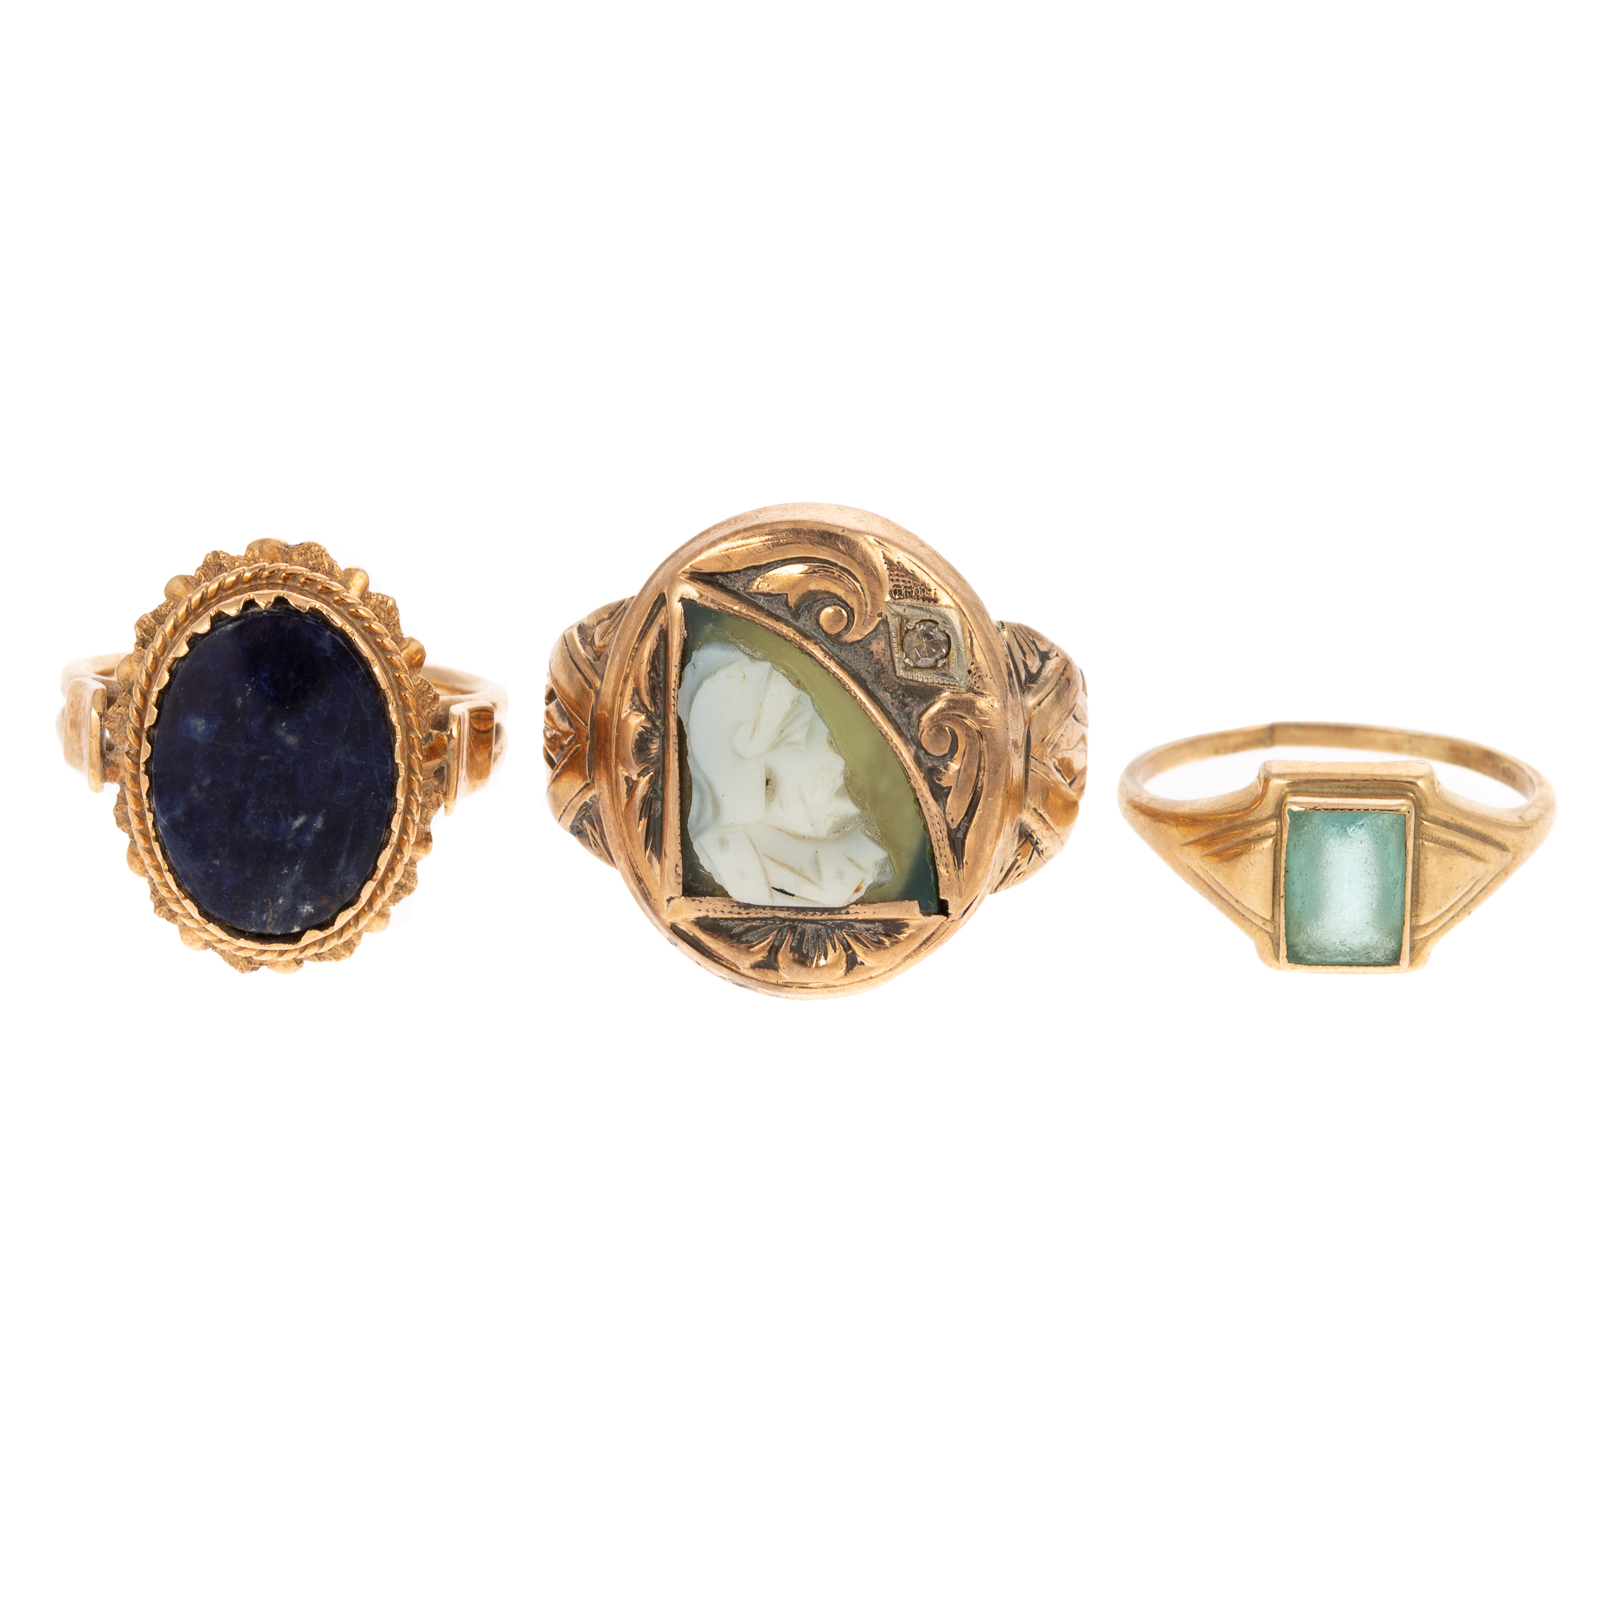 A COLLECTION OF THREE VINTAGE RINGS